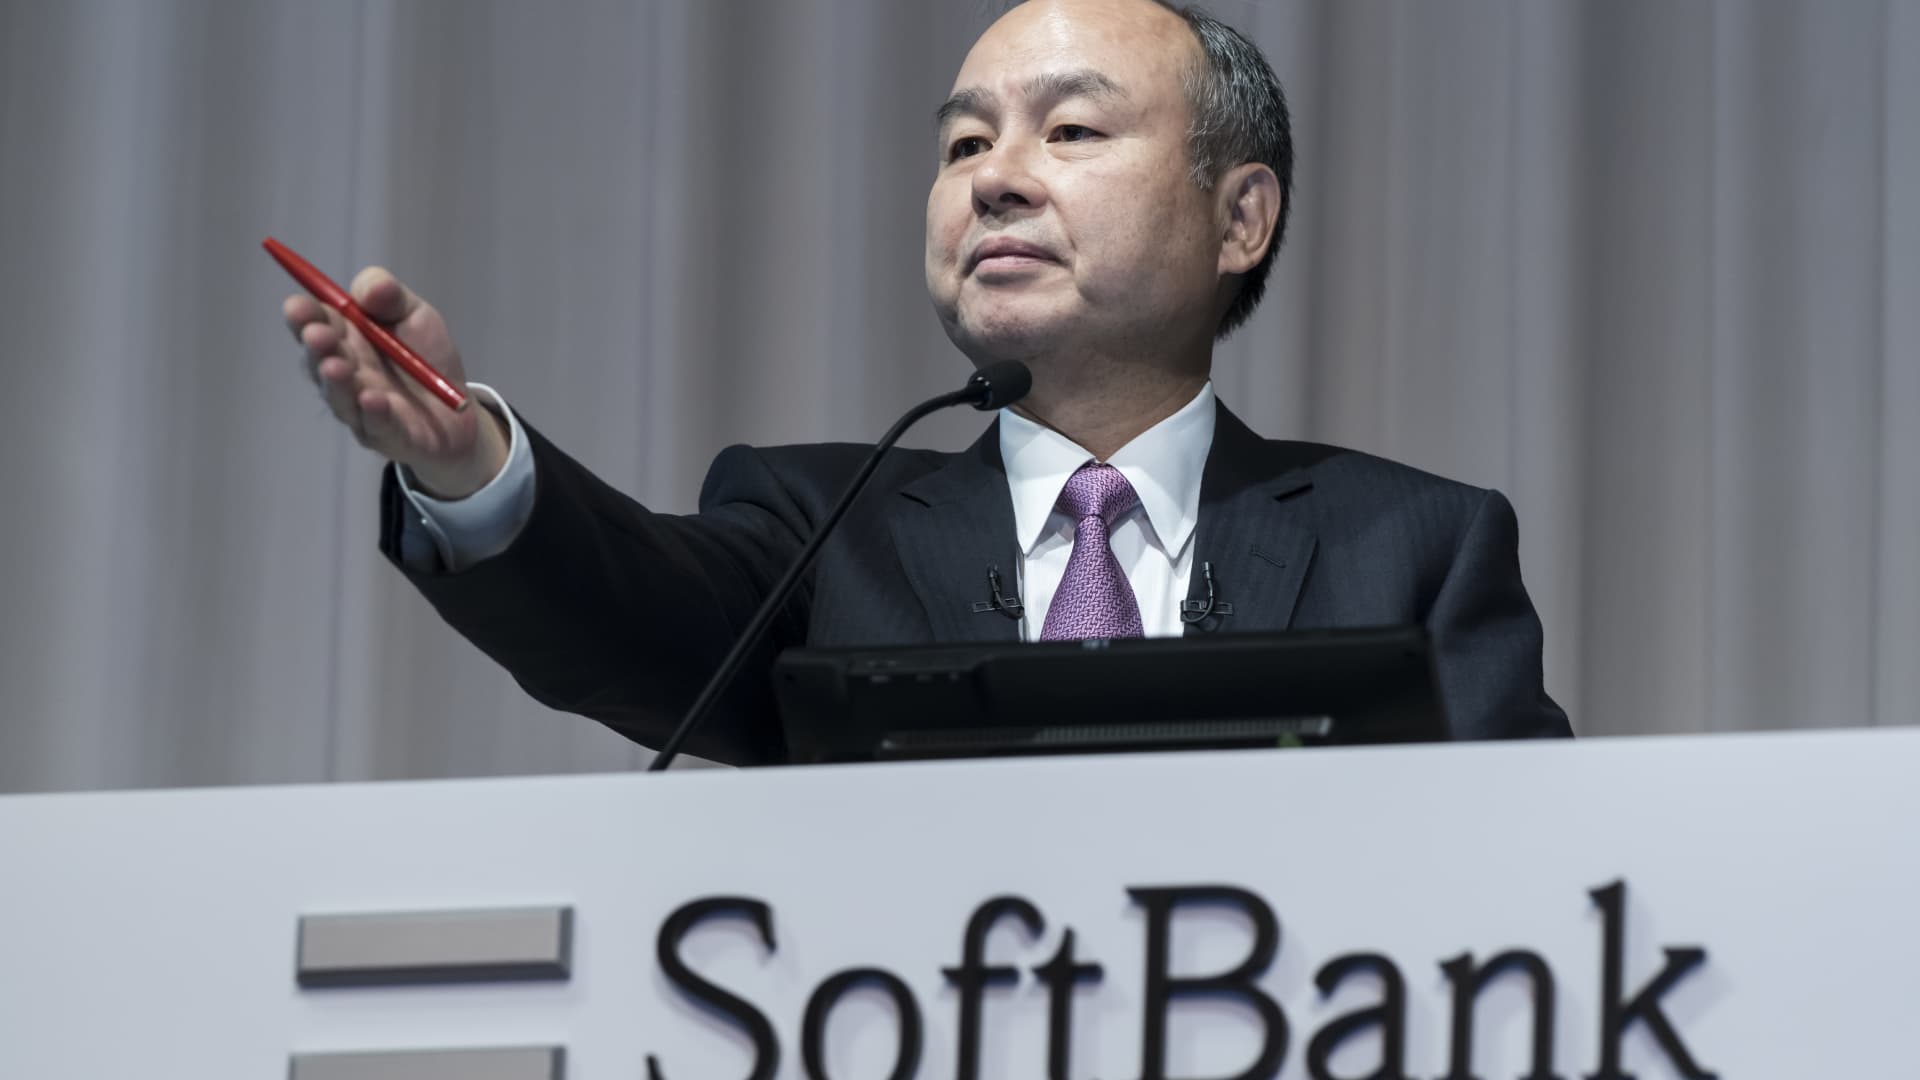 SoftBank would possibly spend extra on percentage buybacks than new investments: CLSA